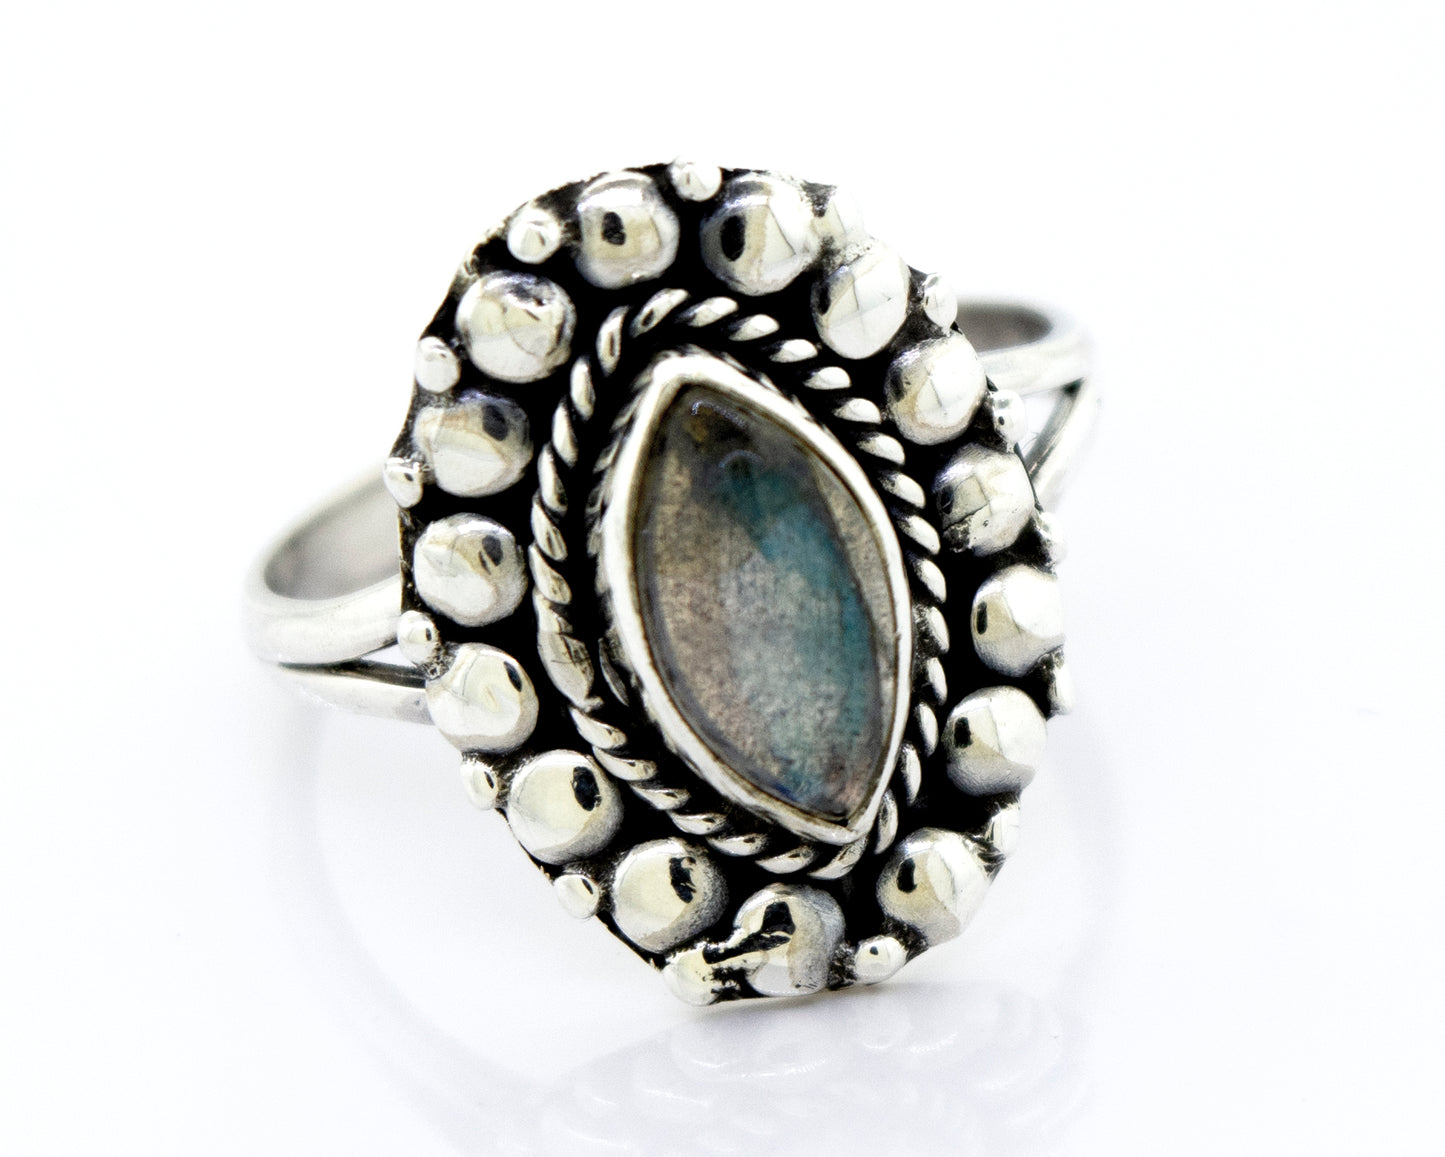 A Super Silver Marquise Shaped Vibrant Labradorite Stone Ring in a beaded design.